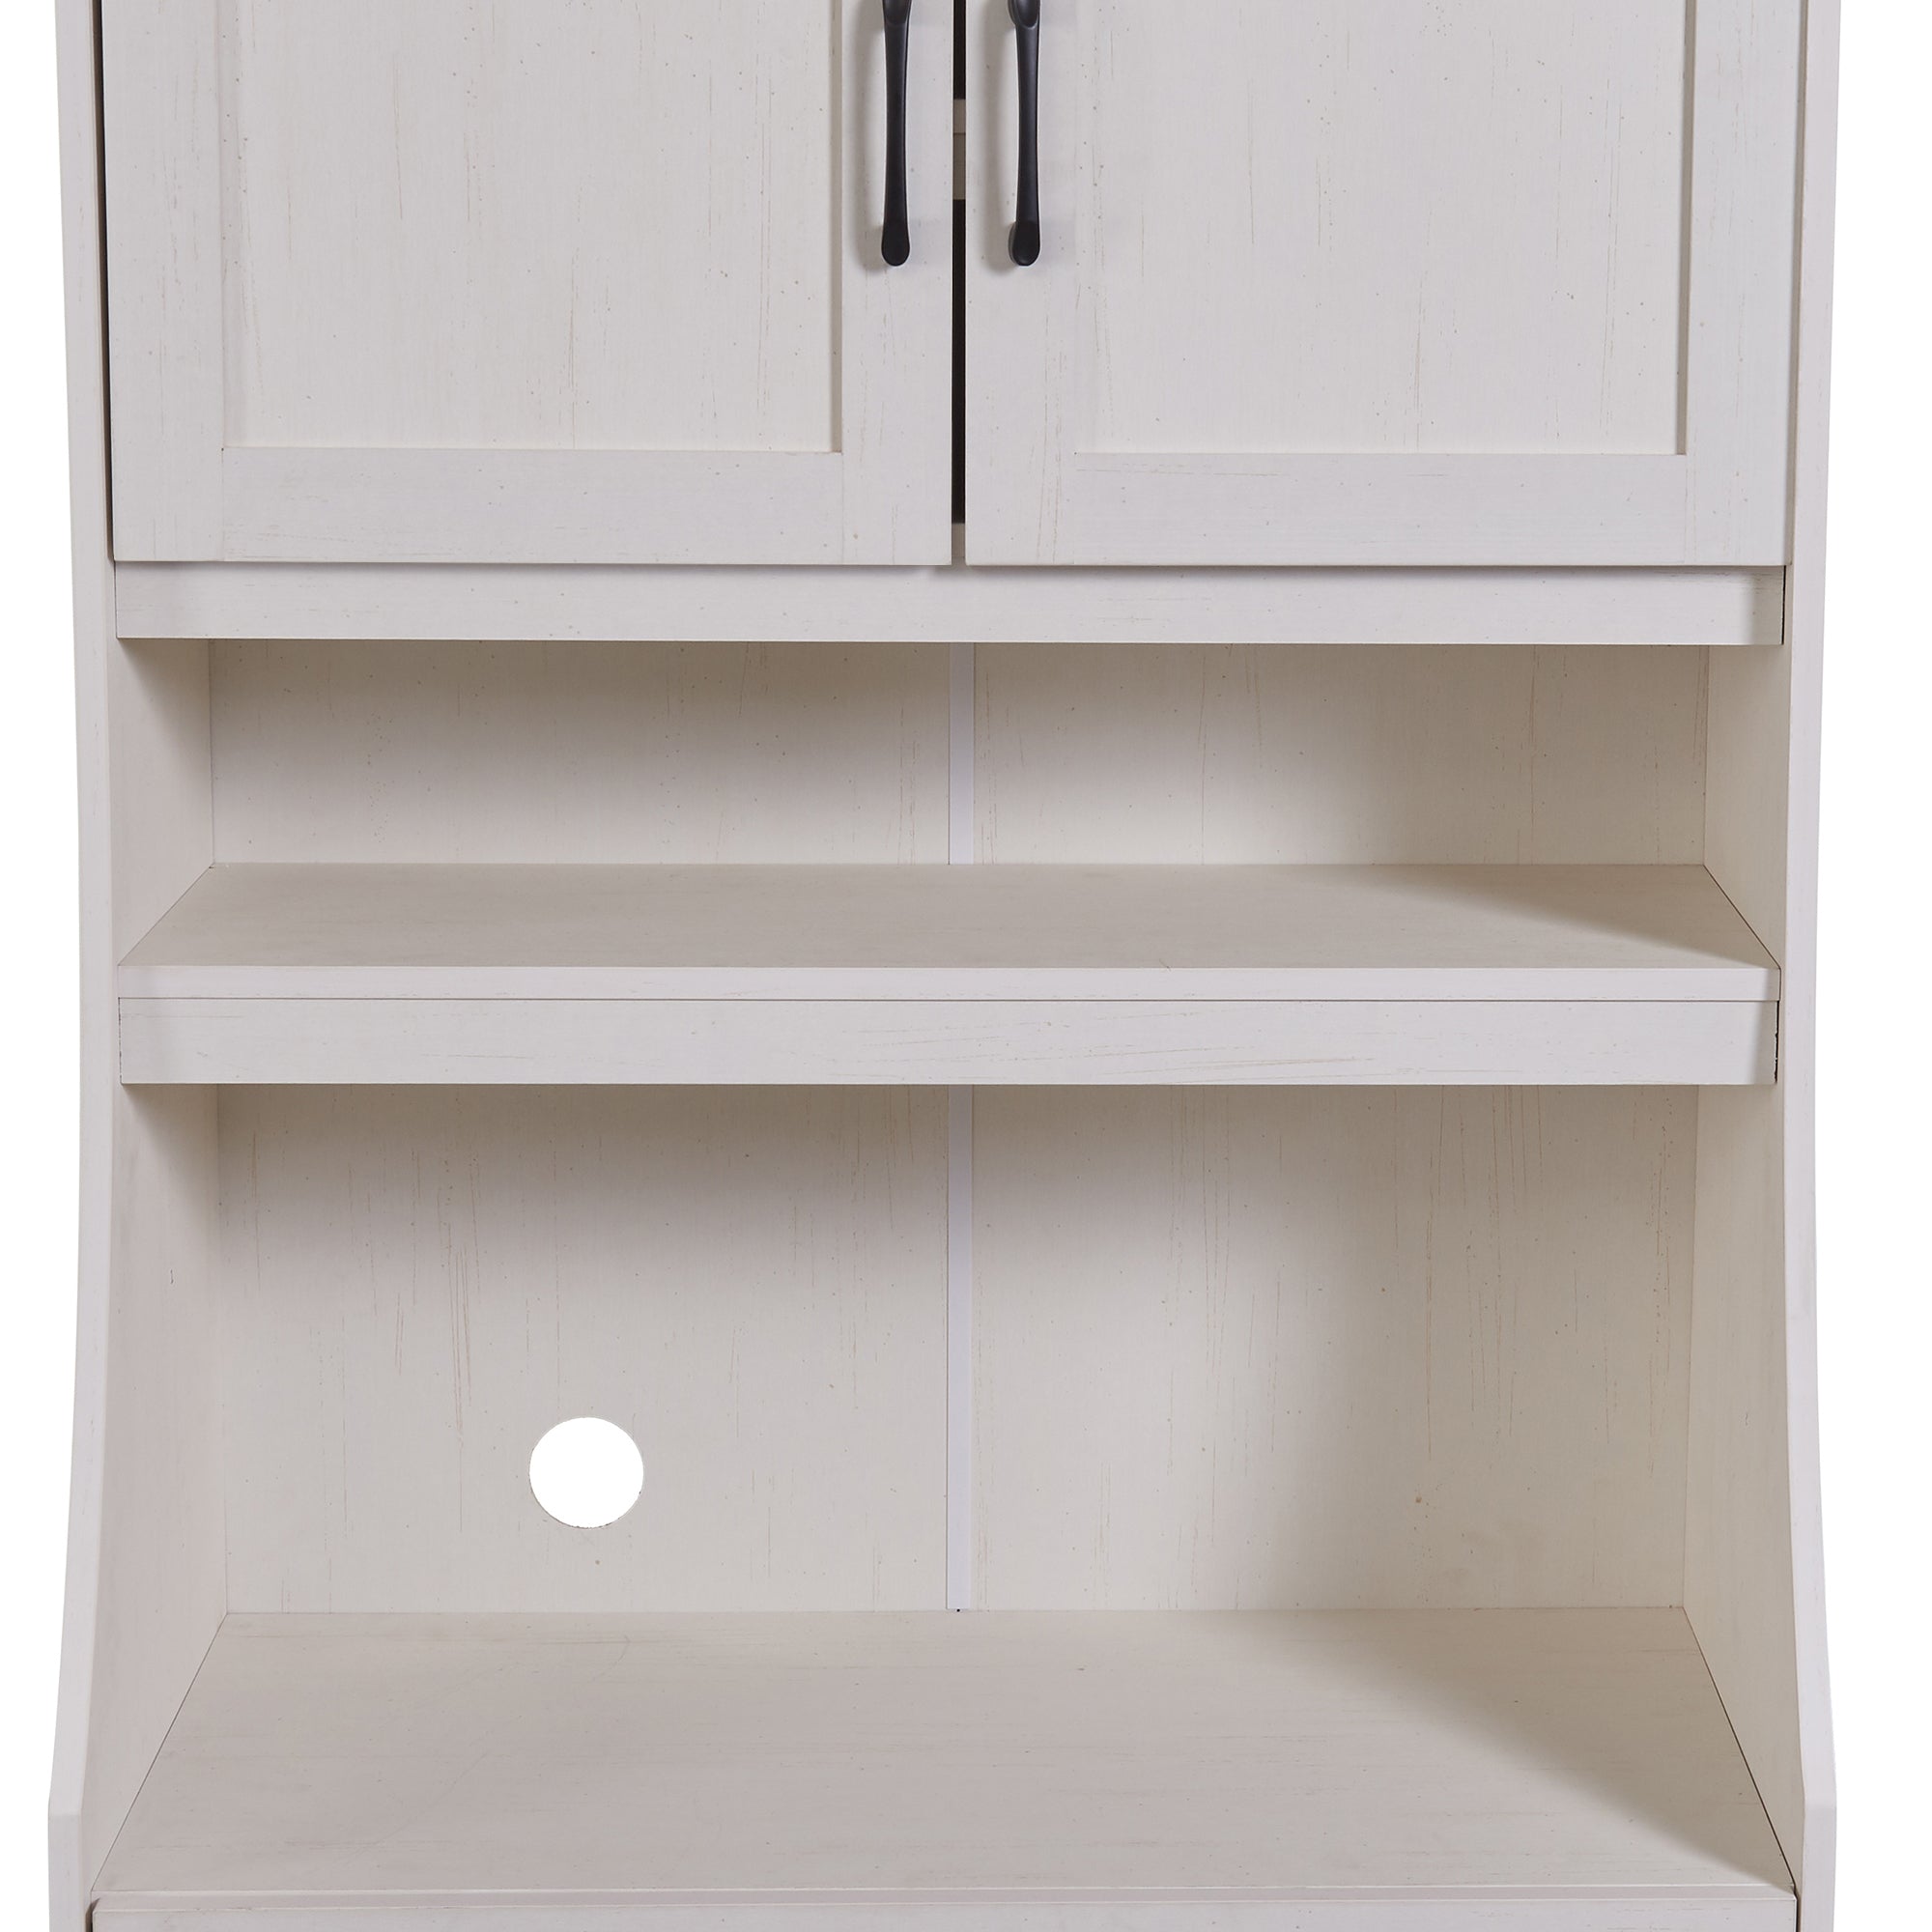 TREXM One-body Style Pantry Cabinet Kitchen Living Room Dining Room Storage Buffet with Doors, Adjustable Shelves (Antique White)